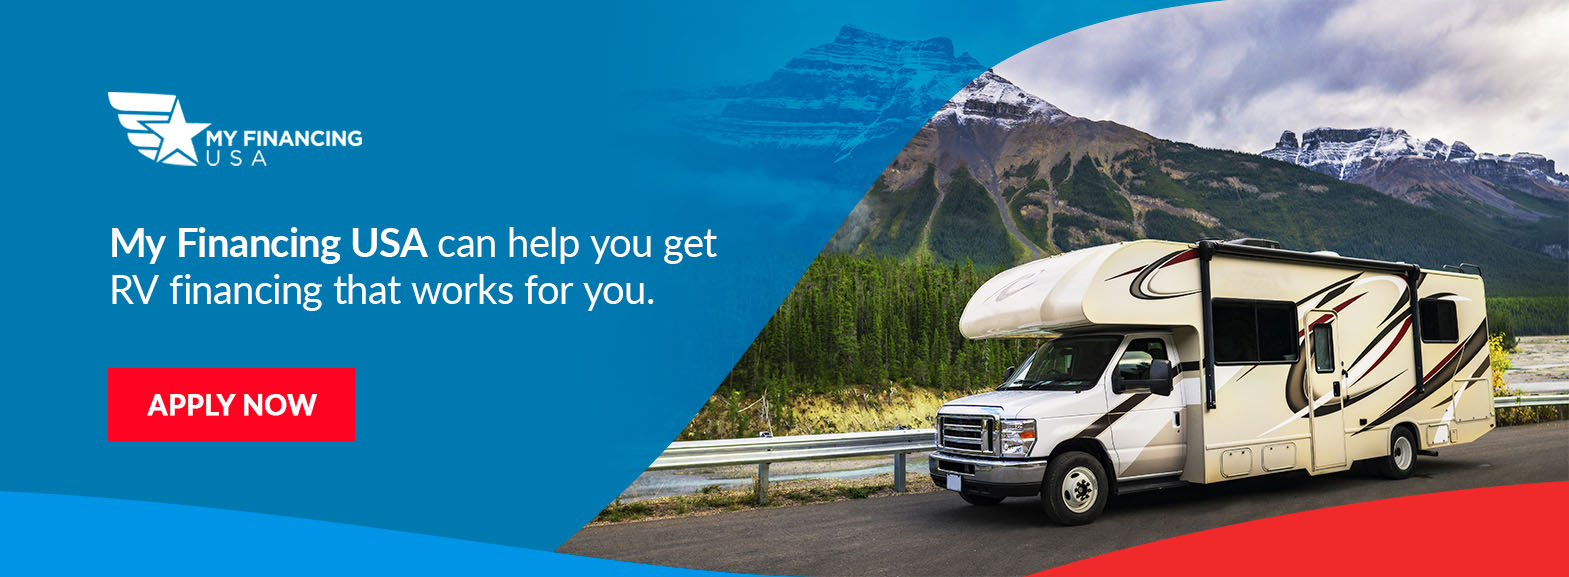 My Financing USA can help you get RV financing that works for you. Apply now!